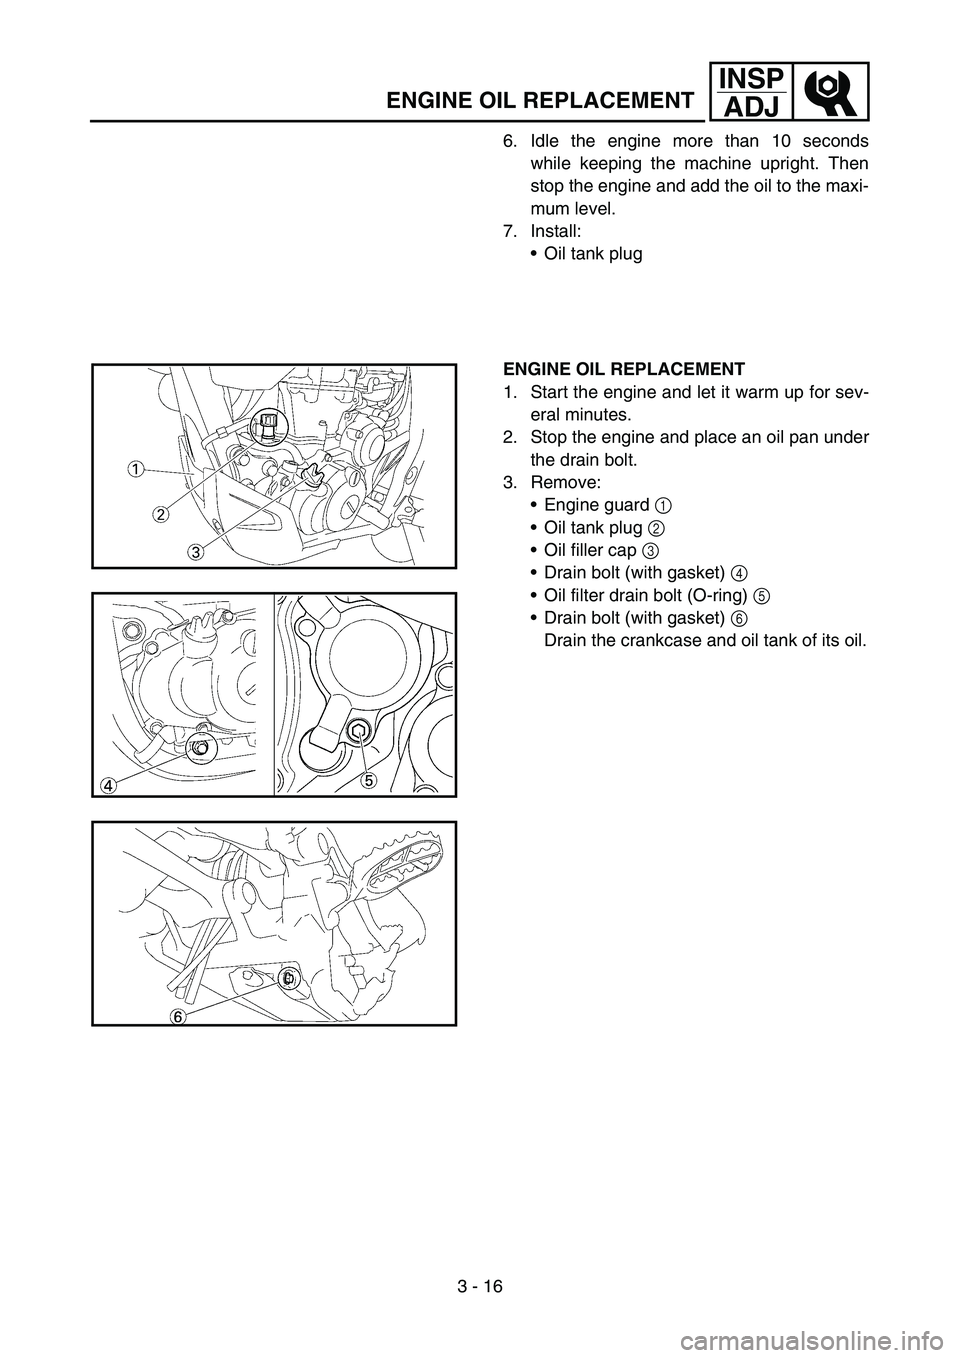 YAMAHA WR 450F 2007  Owners Manual 3 - 16
INSP
ADJ
ENGINE OIL REPLACEMENT
6. Idle the engine more than 10 seconds
while keeping the machine upright. Then
stop the engine and add the oil to the maxi-
mum level.
7. Install:
Oil tank plu